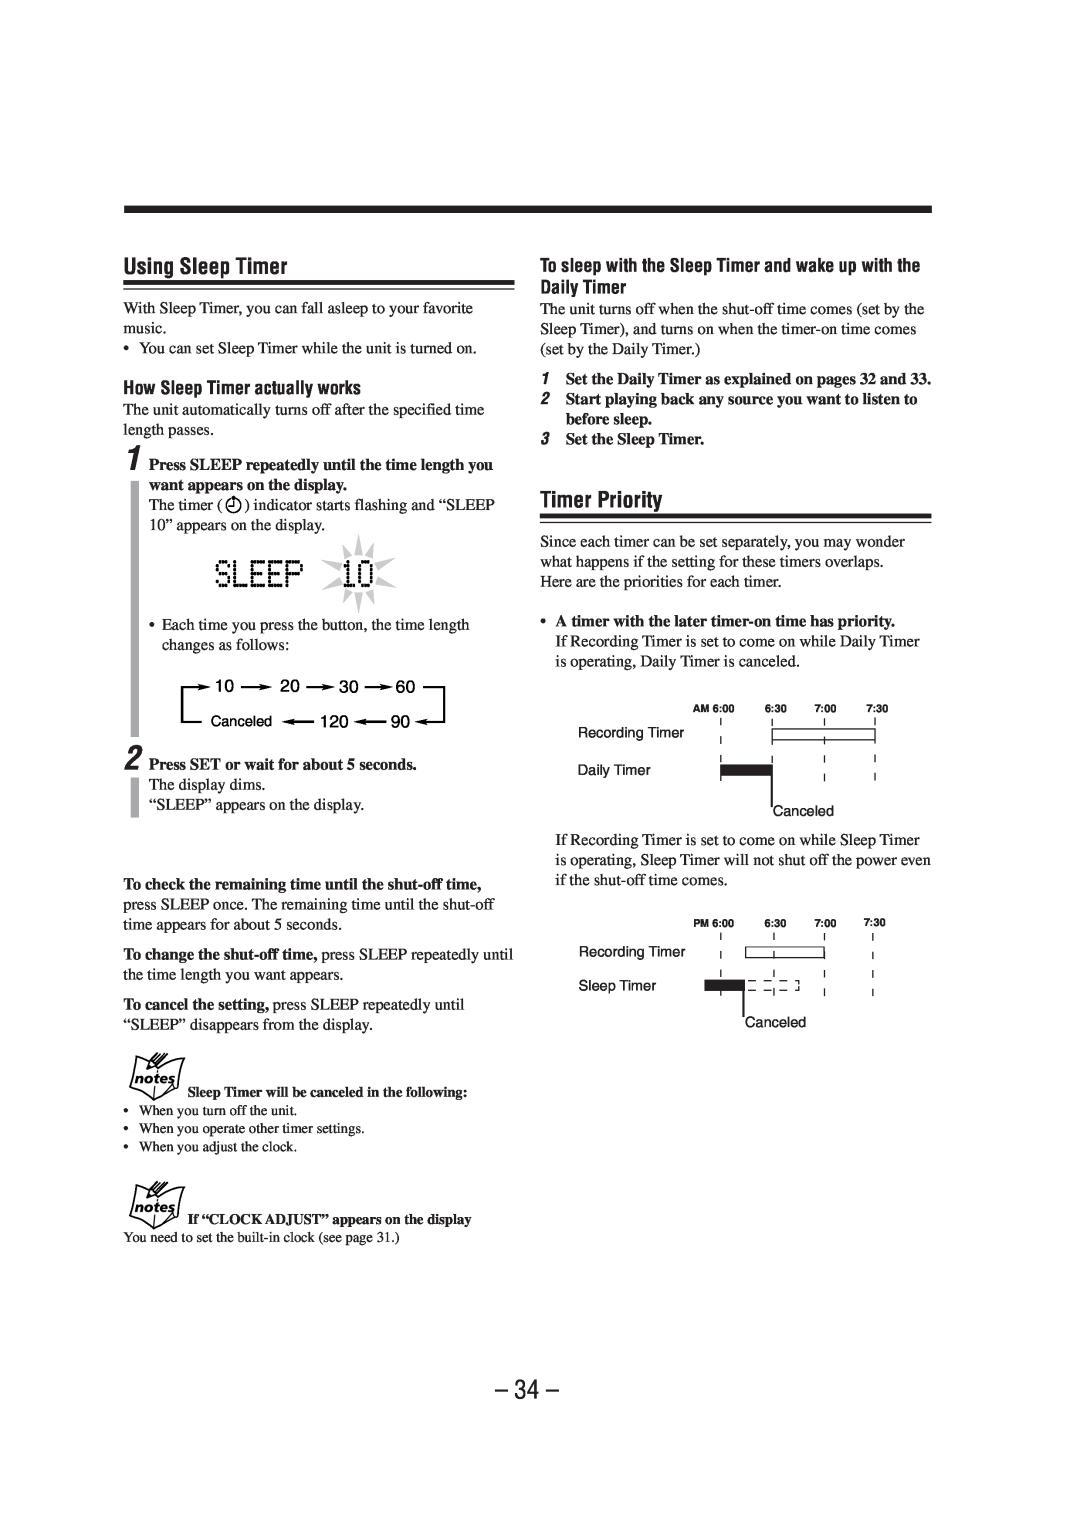 JVC FS-A52 manual Using Sleep Timer, Timer Priority, How Sleep Timer actually works 